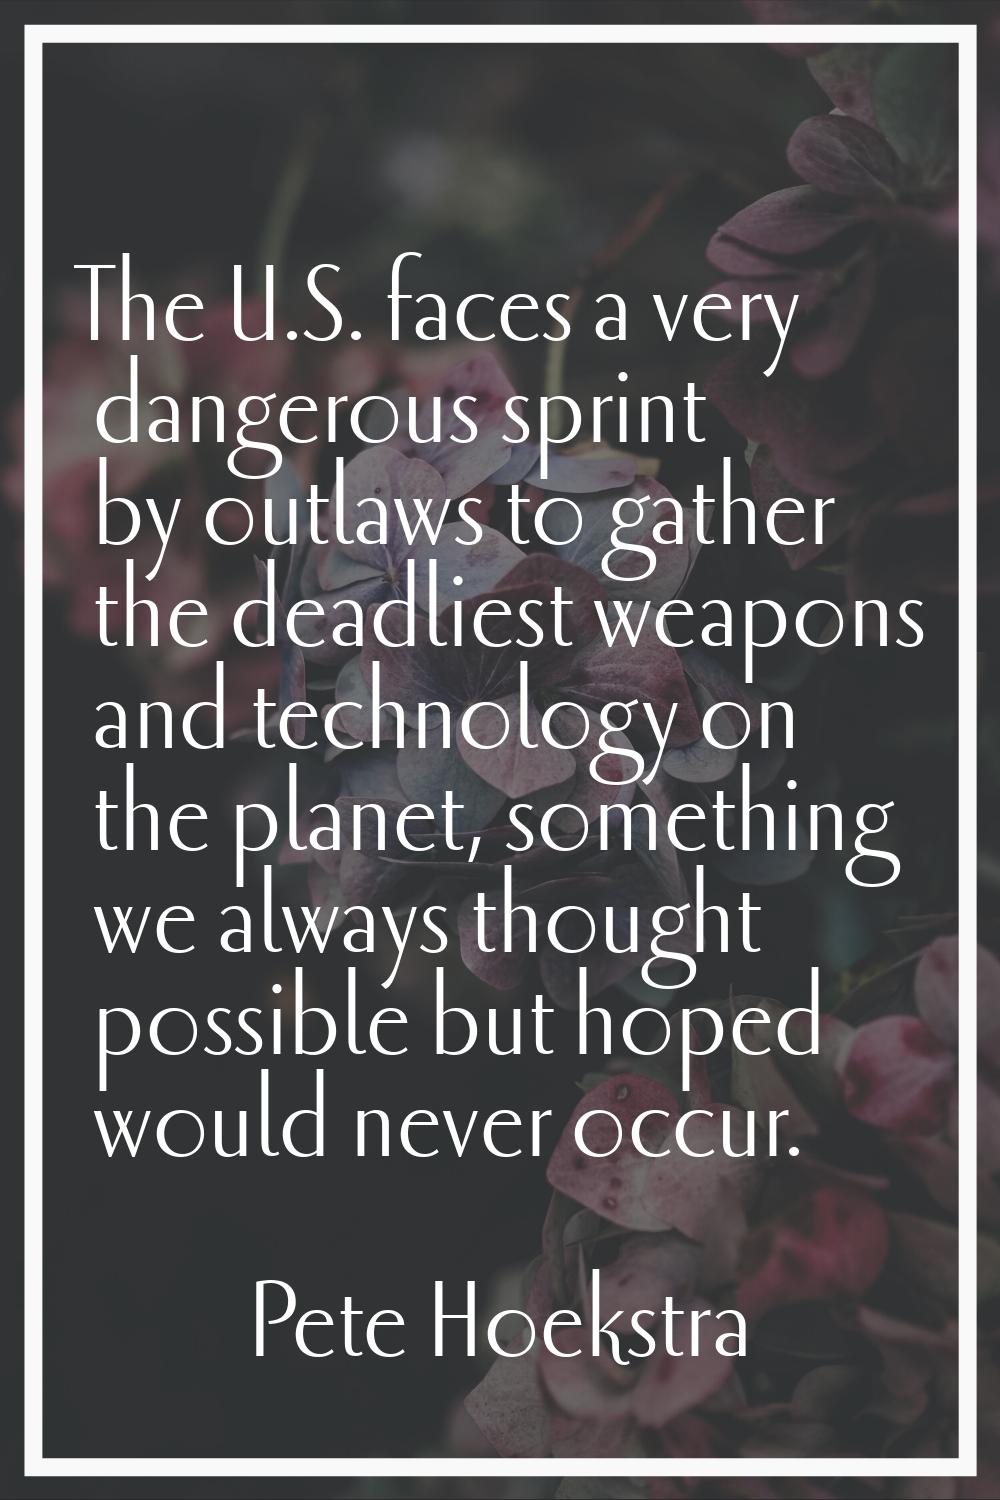 The U.S. faces a very dangerous sprint by outlaws to gather the deadliest weapons and technology on